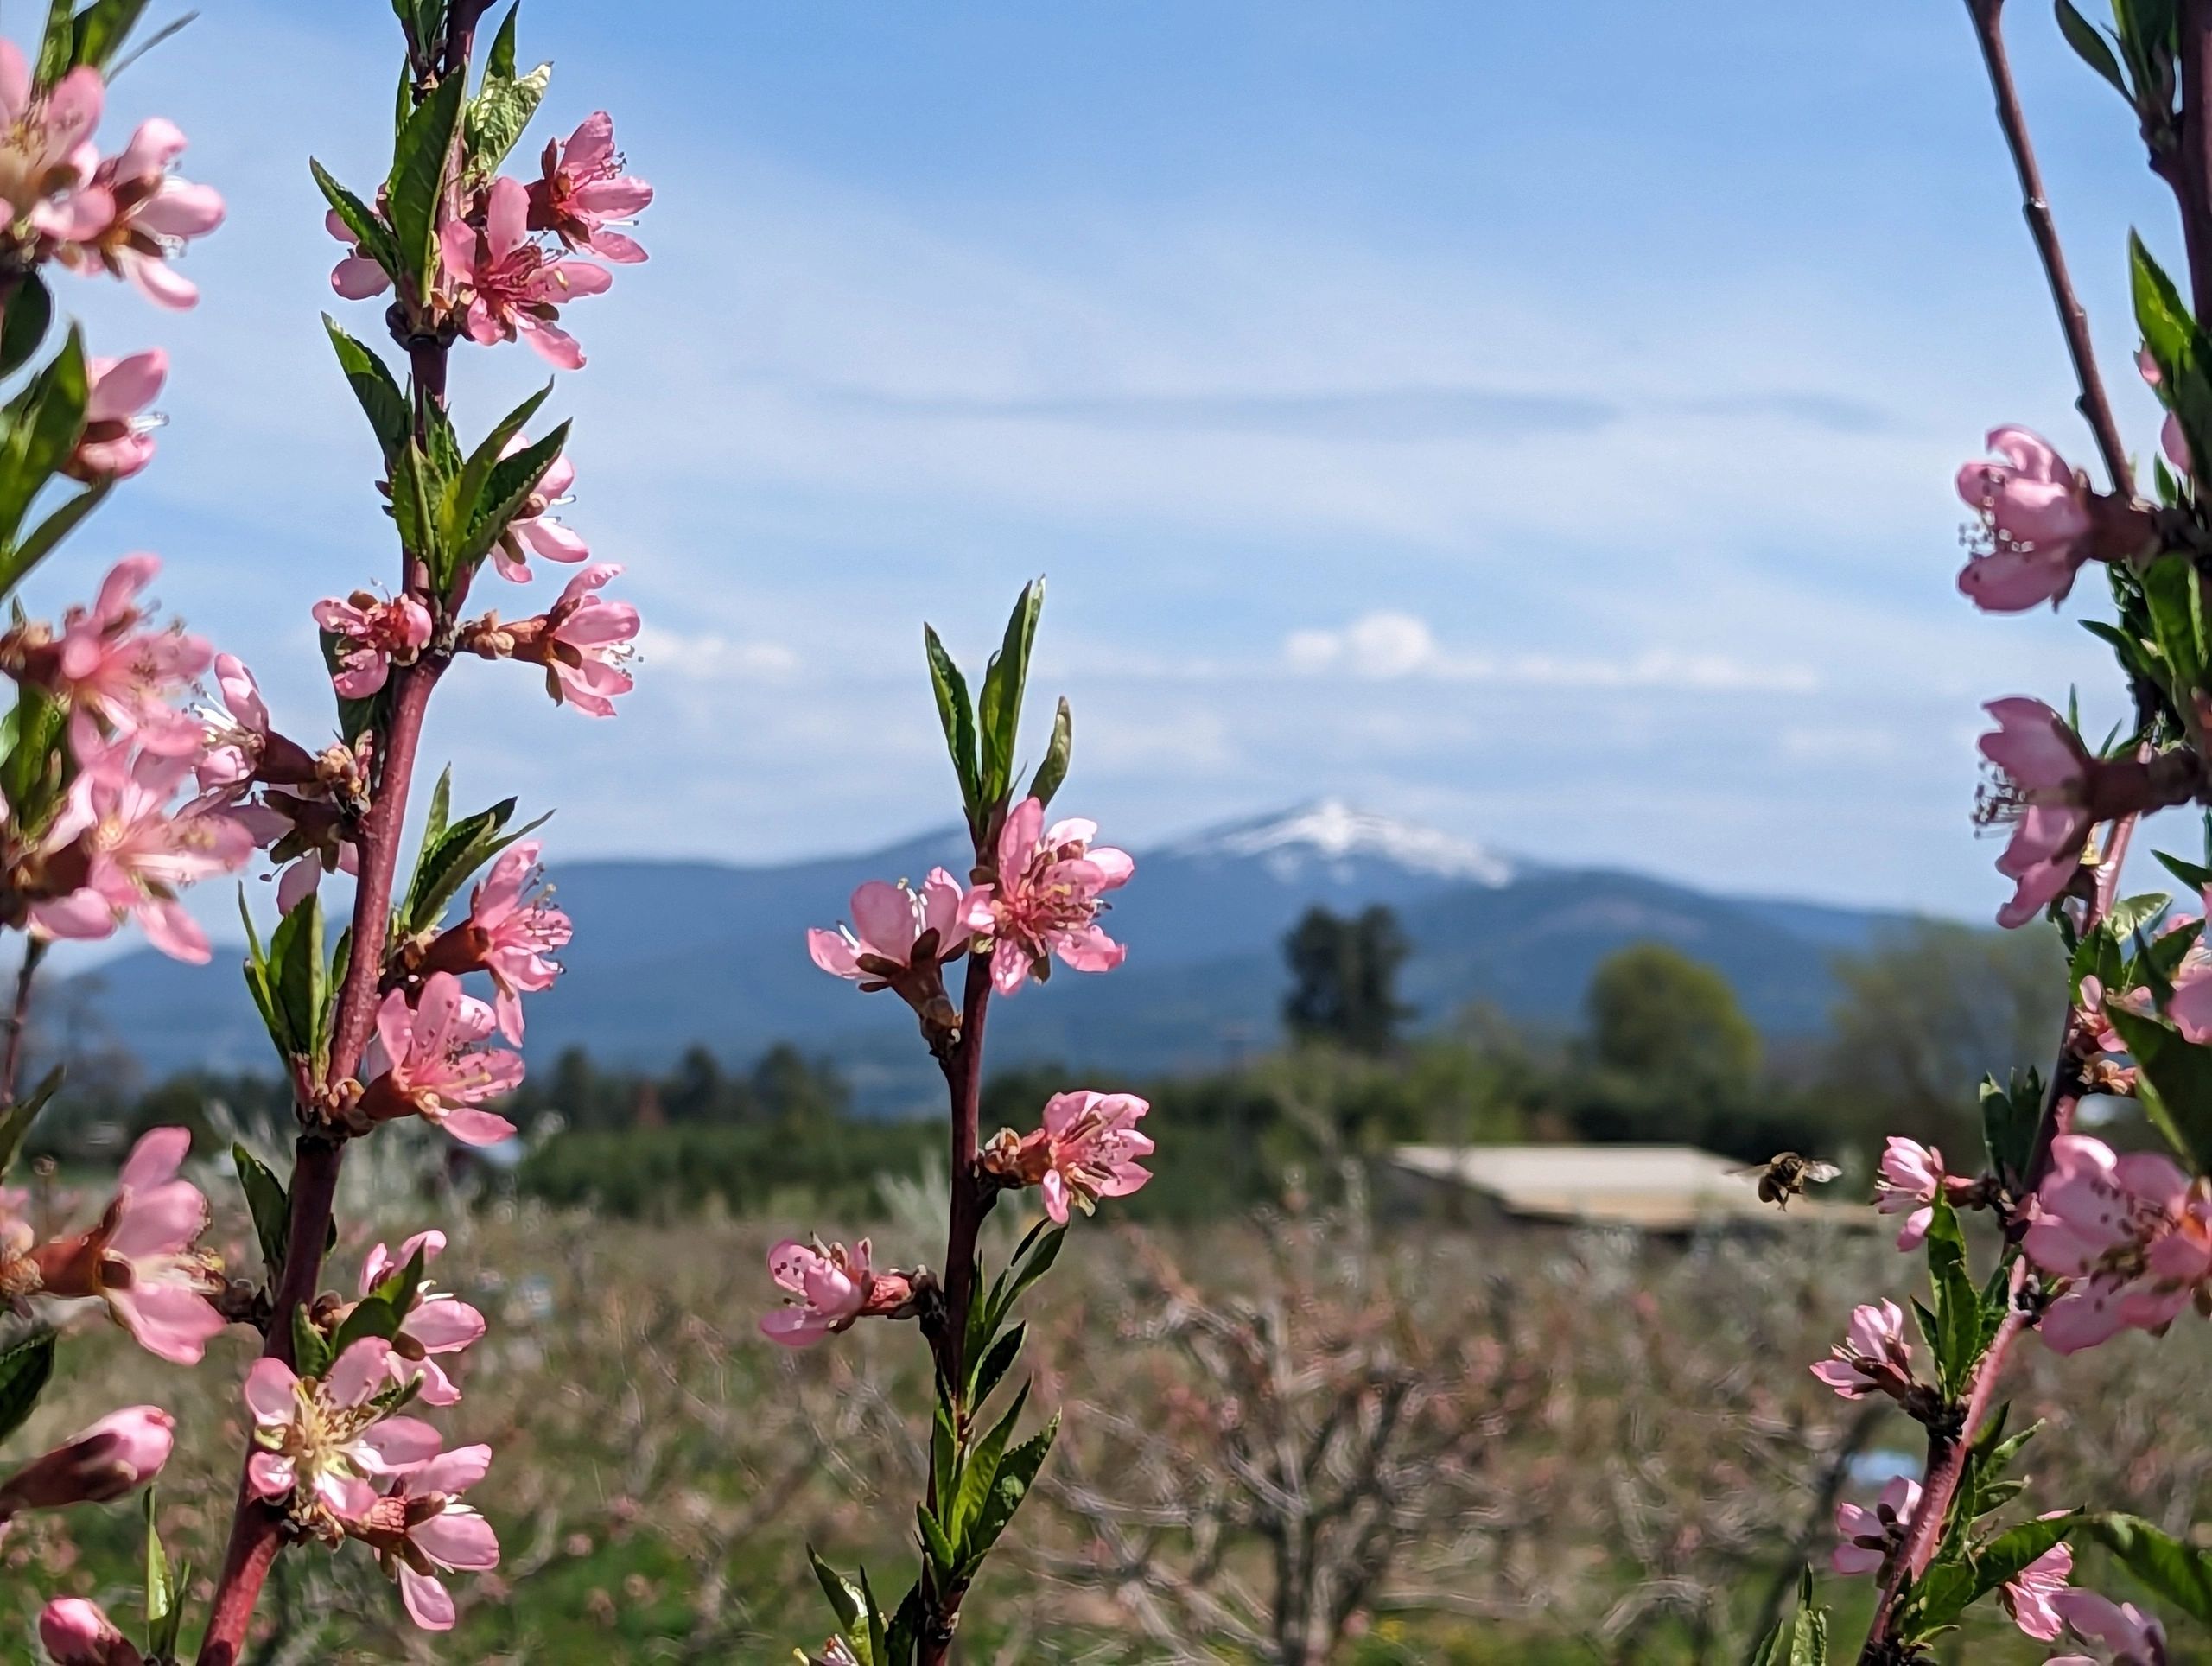 Peach blossoms in early spring.